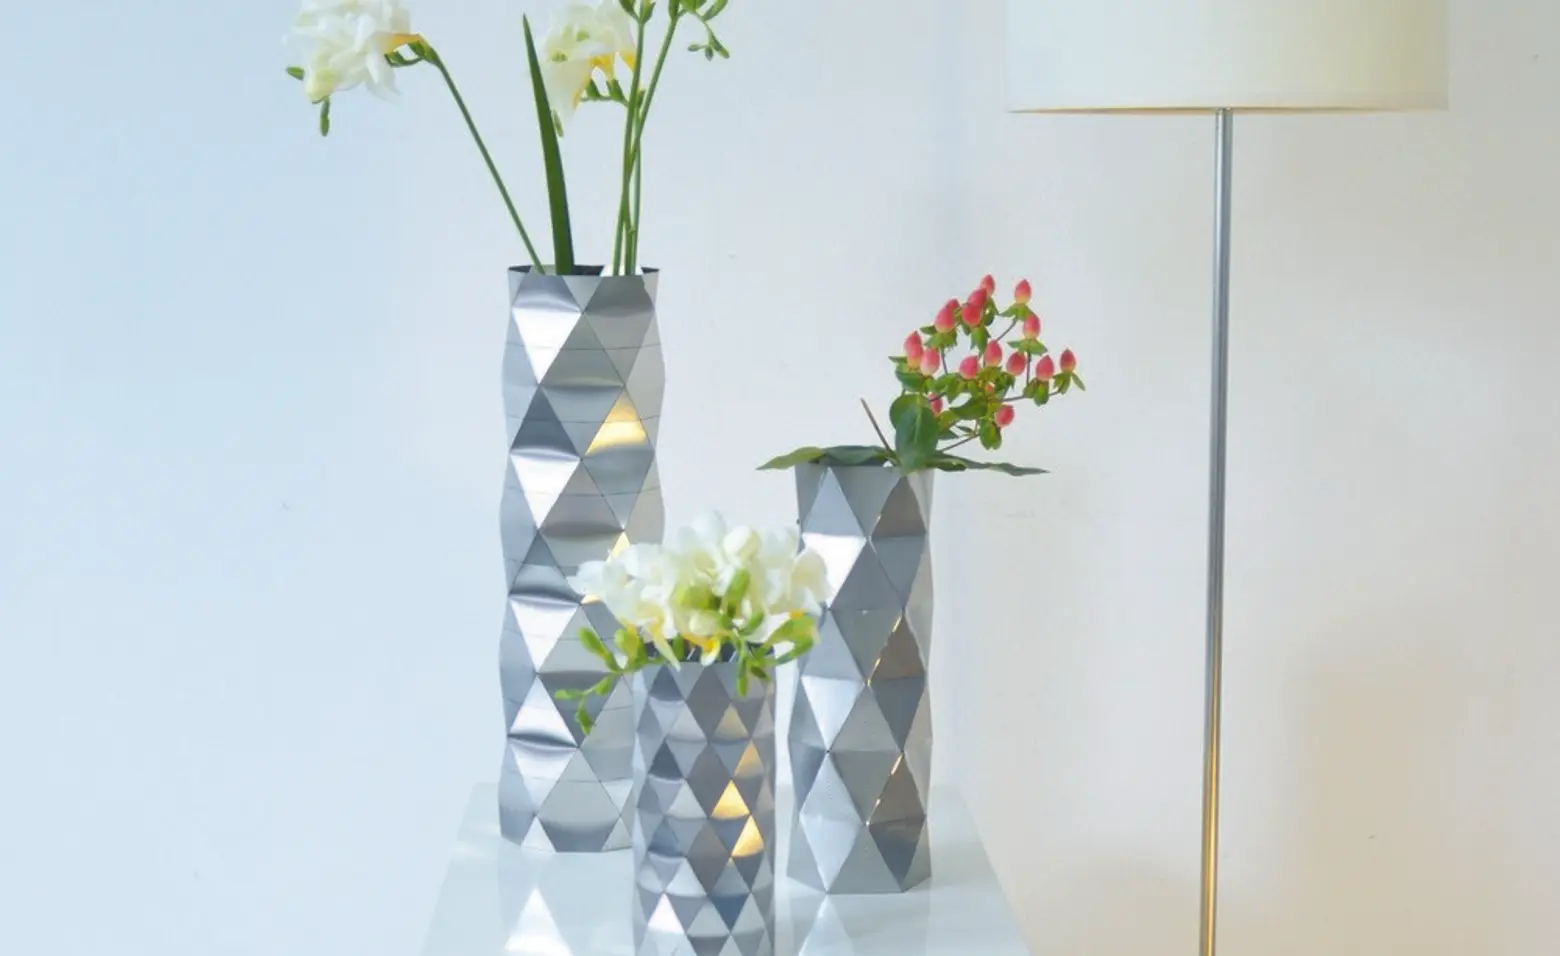 stainless steel vases, Convert Vase Collection, Another Studio, architectural vases, designs influenced by architectural geometry, London design firms